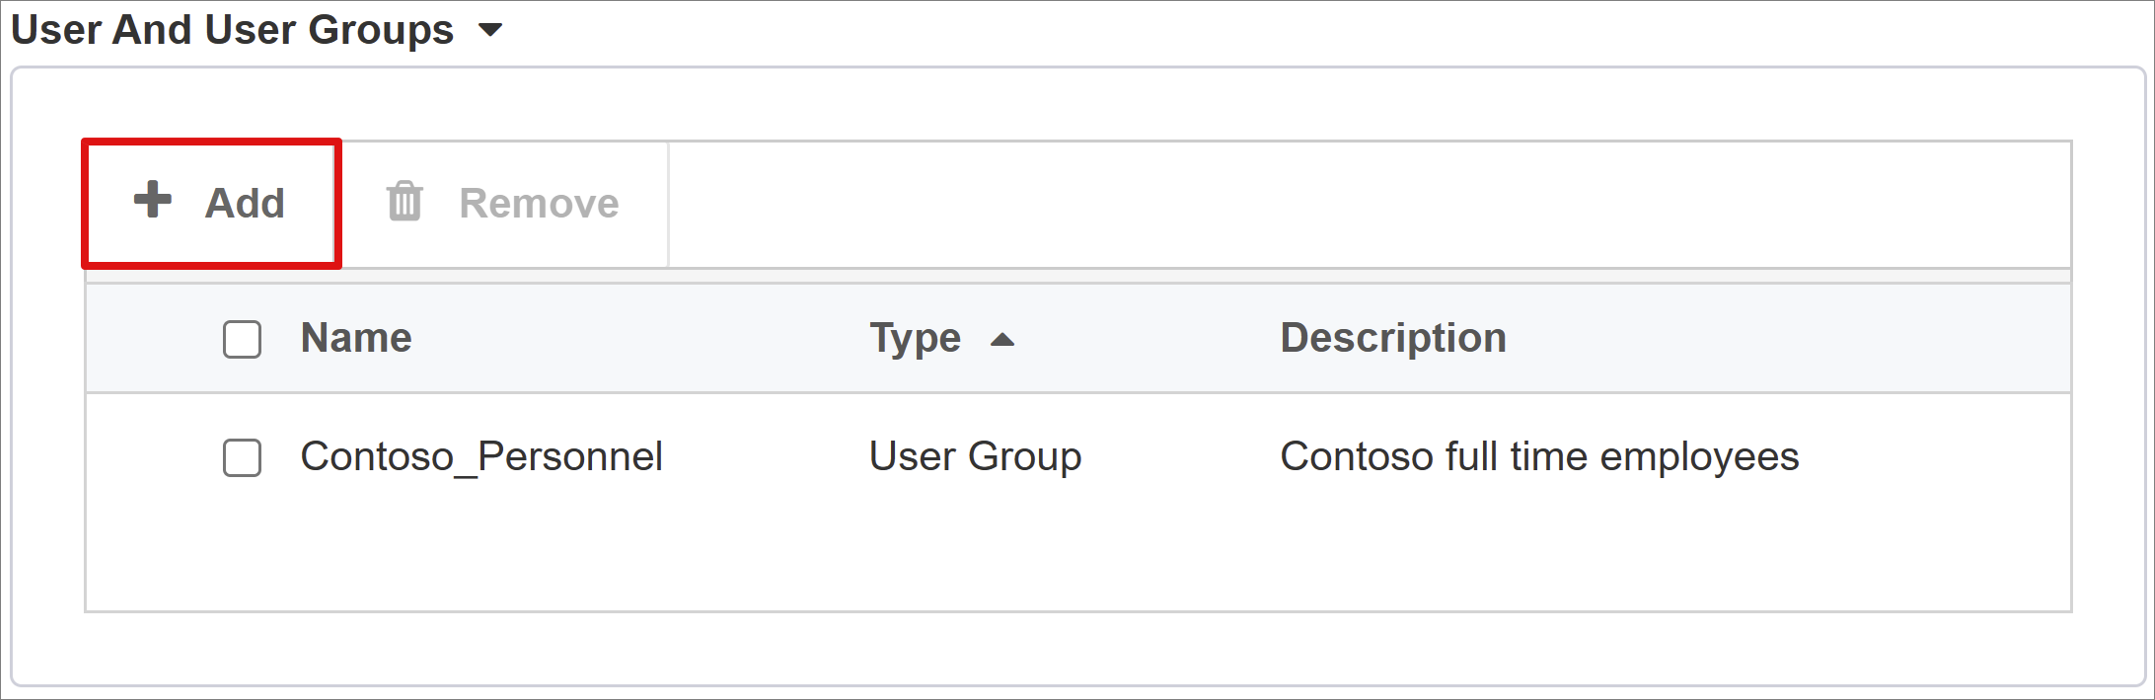 Screenshot of the Add option under Users And User Groups.